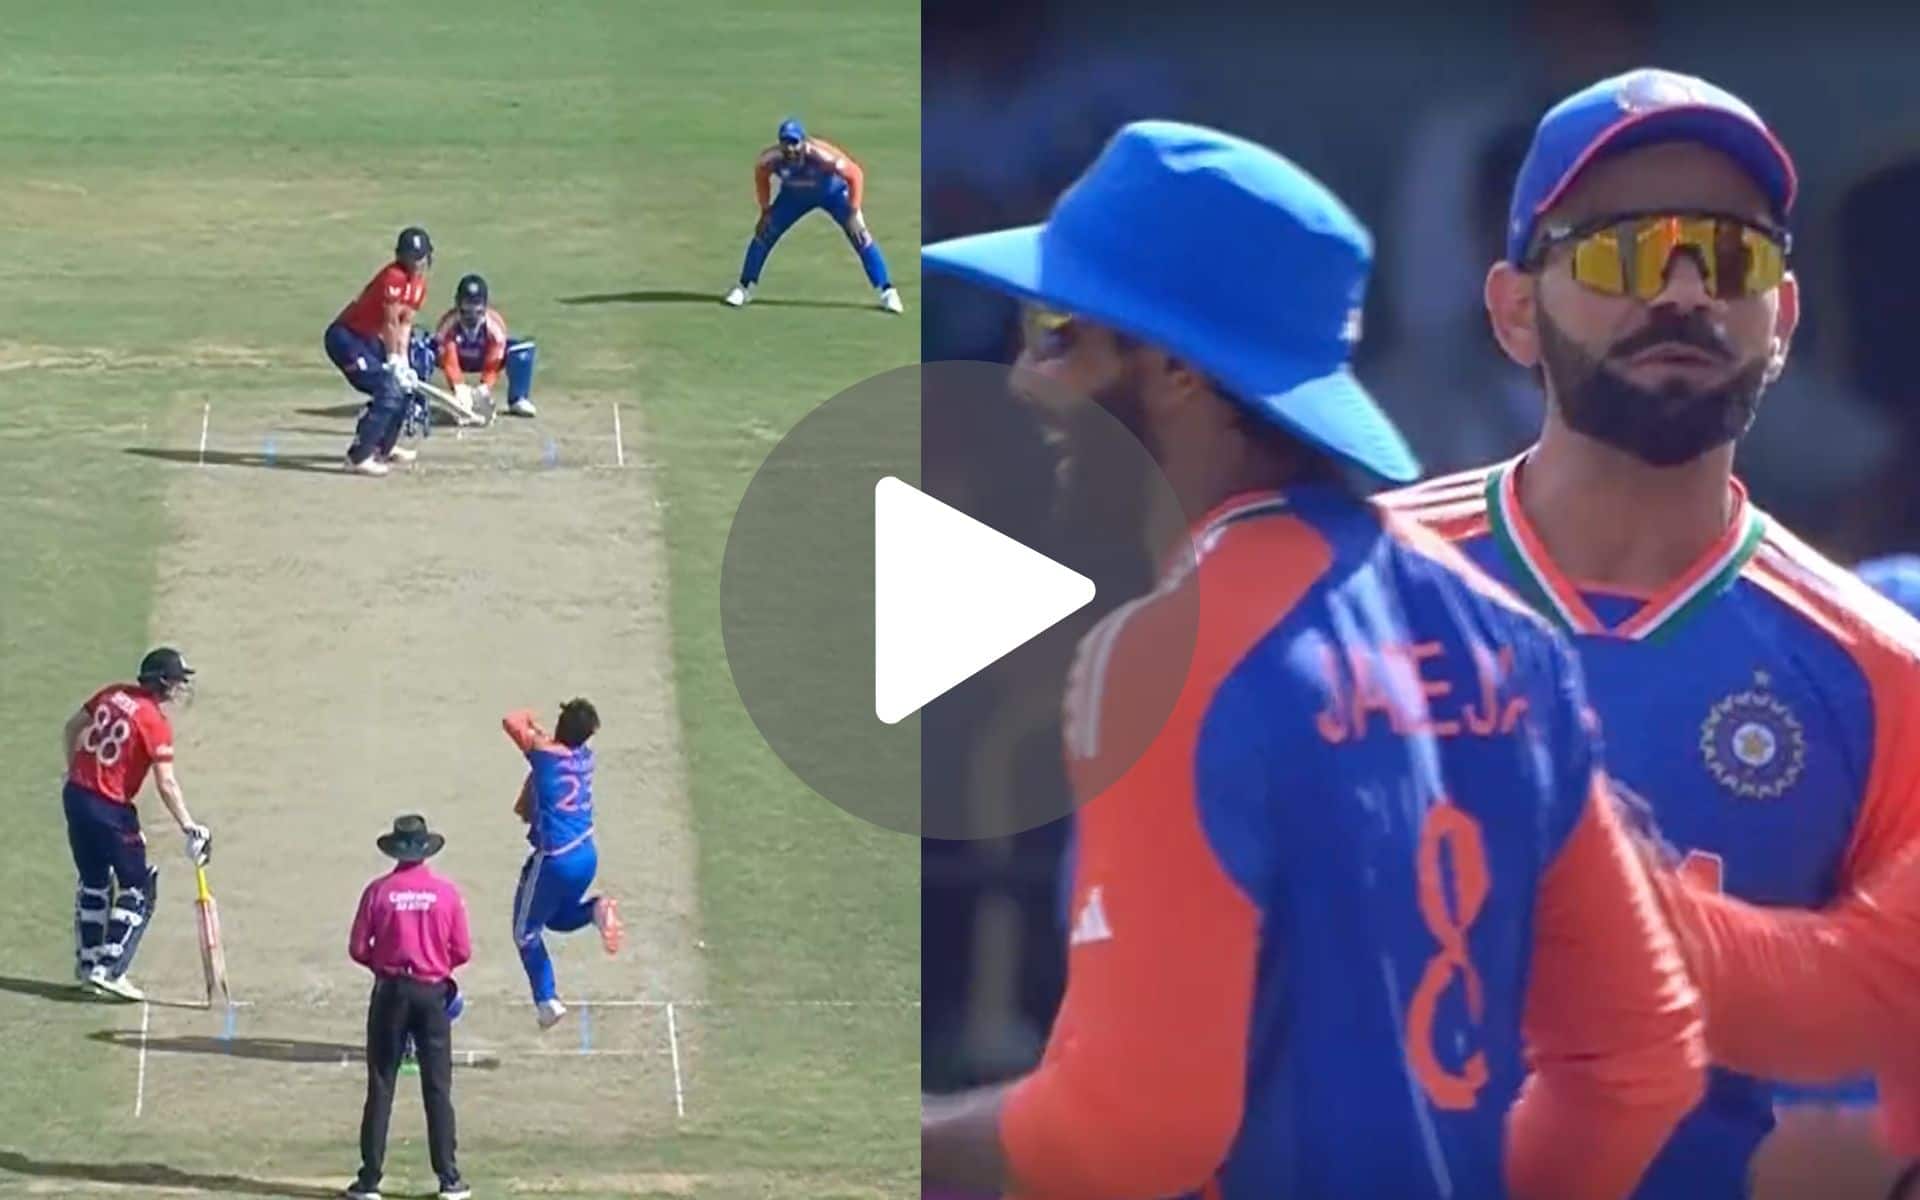 [Watch] Kohli Avenges Pant's Wicket With An Aggressive Send-Off To Sam Curran